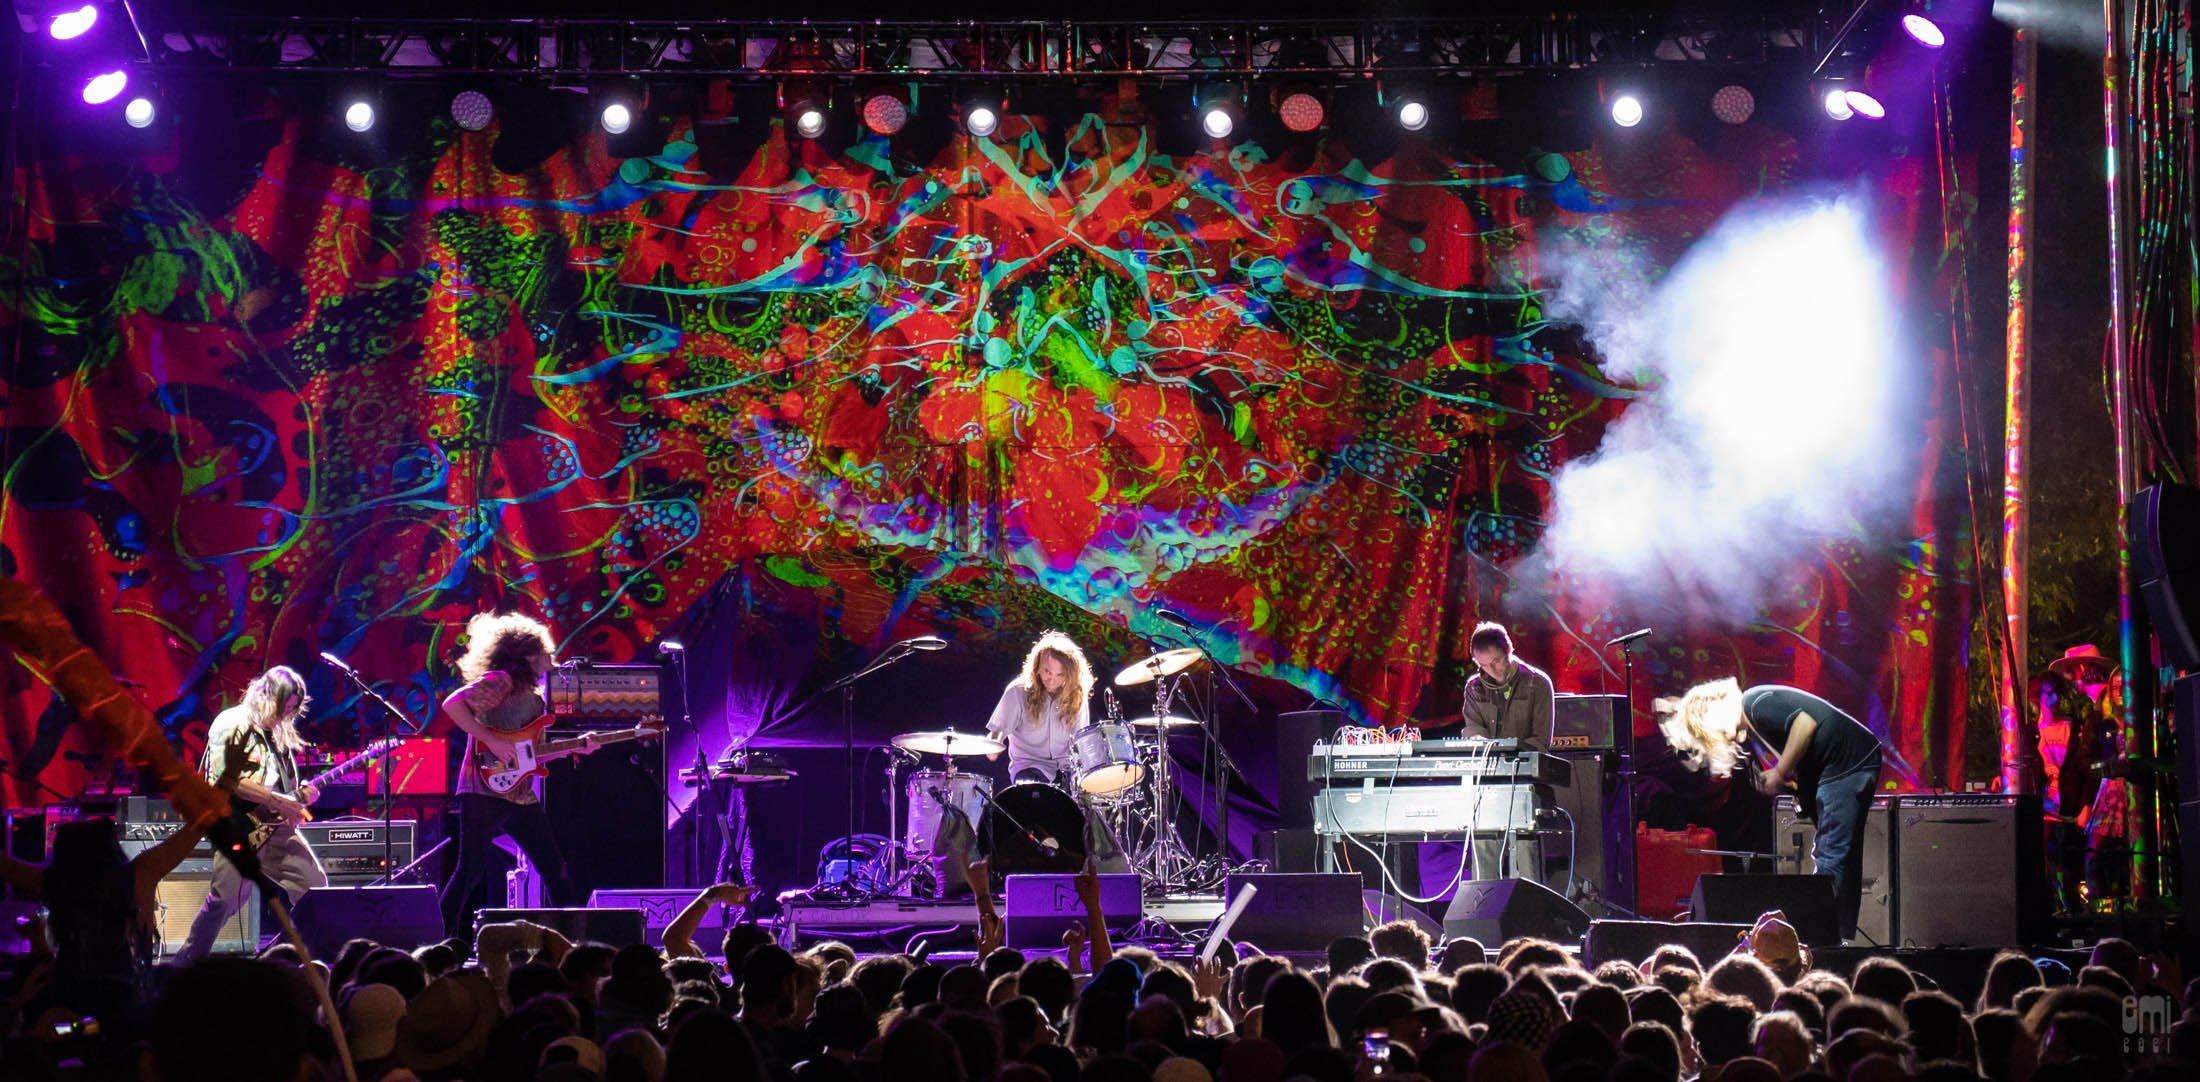 20211112 Ty Segall with Mad Alchemy Liquid Light Show at Desert Daze 2021, photo by emi